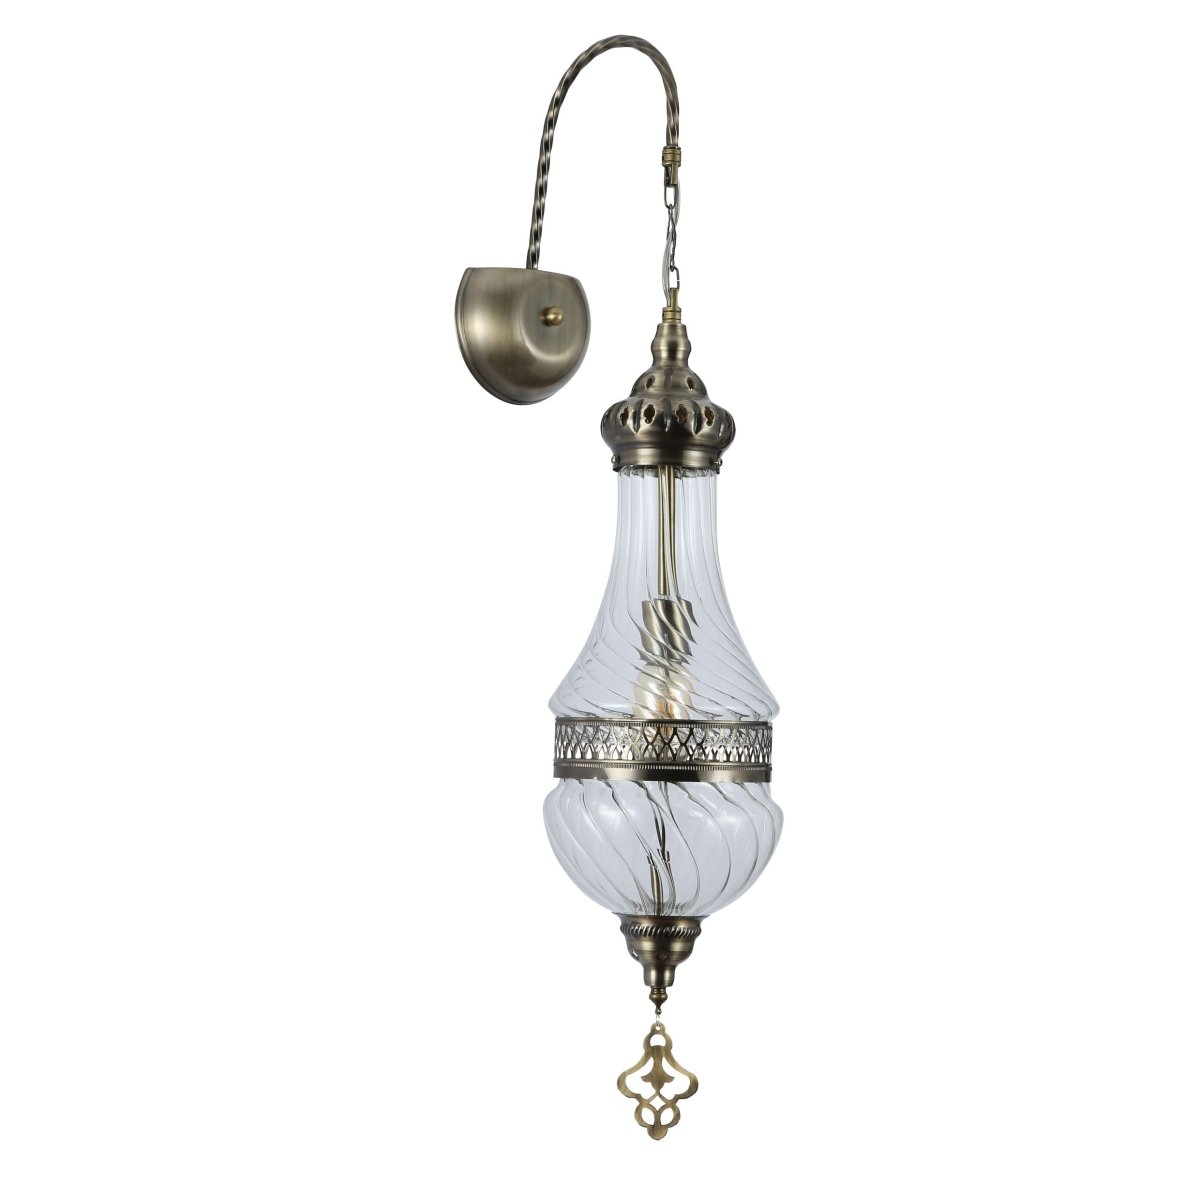 Main image of Clear Glass Antique Bronze Metal Body Moroccan Style Wall Light with E27 Fitting | TEKLED 151-19457